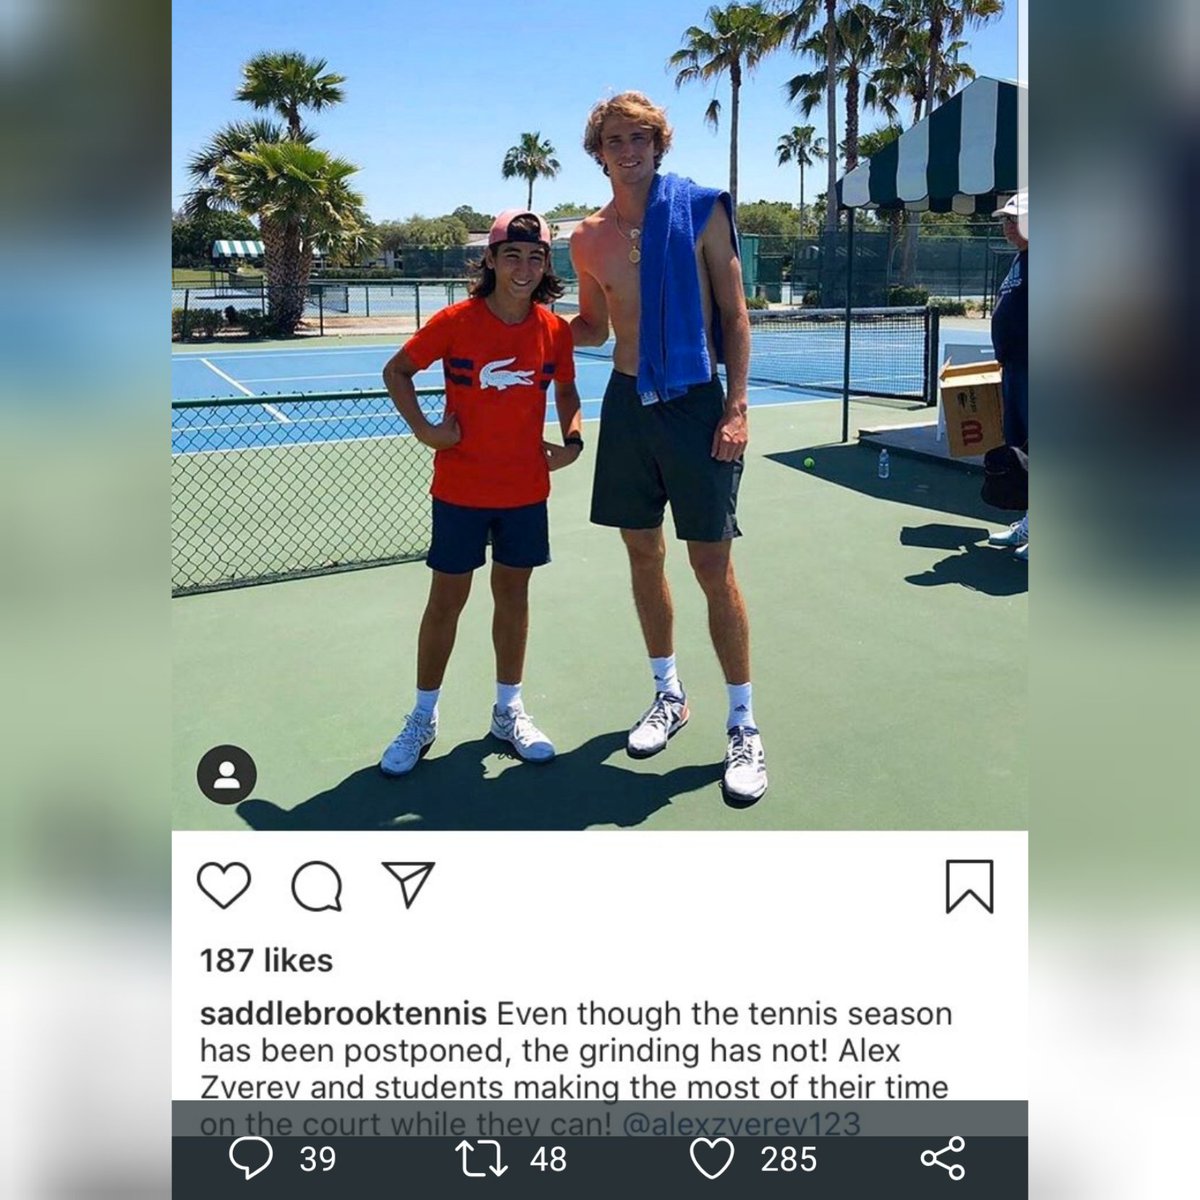 Jannik Schneider on Twitter: "Saddlebrook Tennis Acad. and A. #Zverev got  kind of a shitstorm after the academy in Florida posted this non  socialdistancing photo after practice yesterday In the meantime it